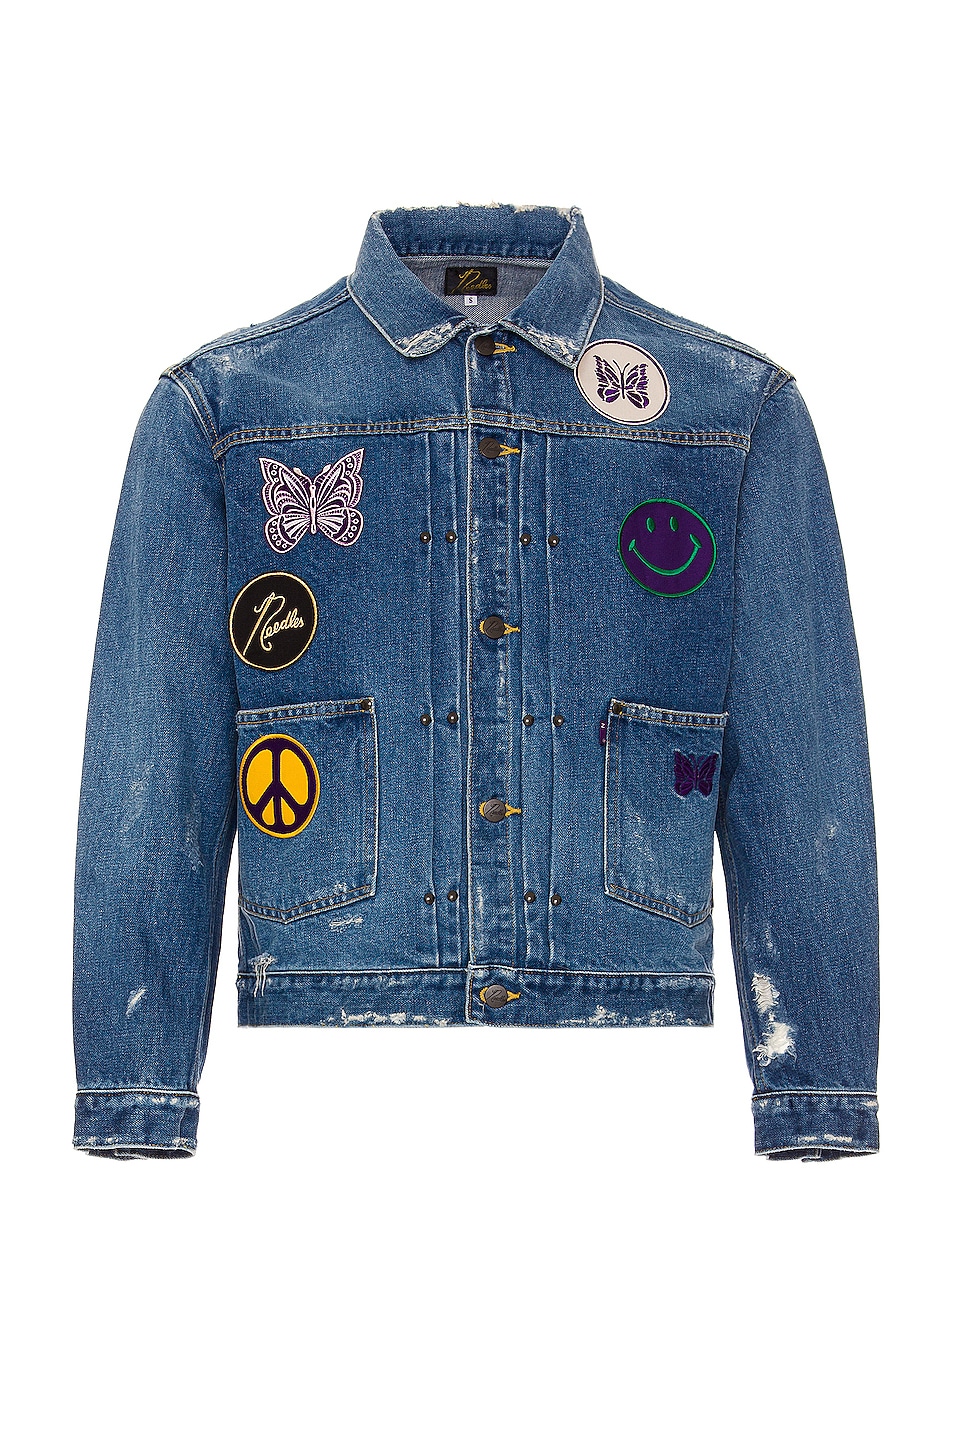 Image 1 of Needles Assorted Patches Jean Jacket in Indigo